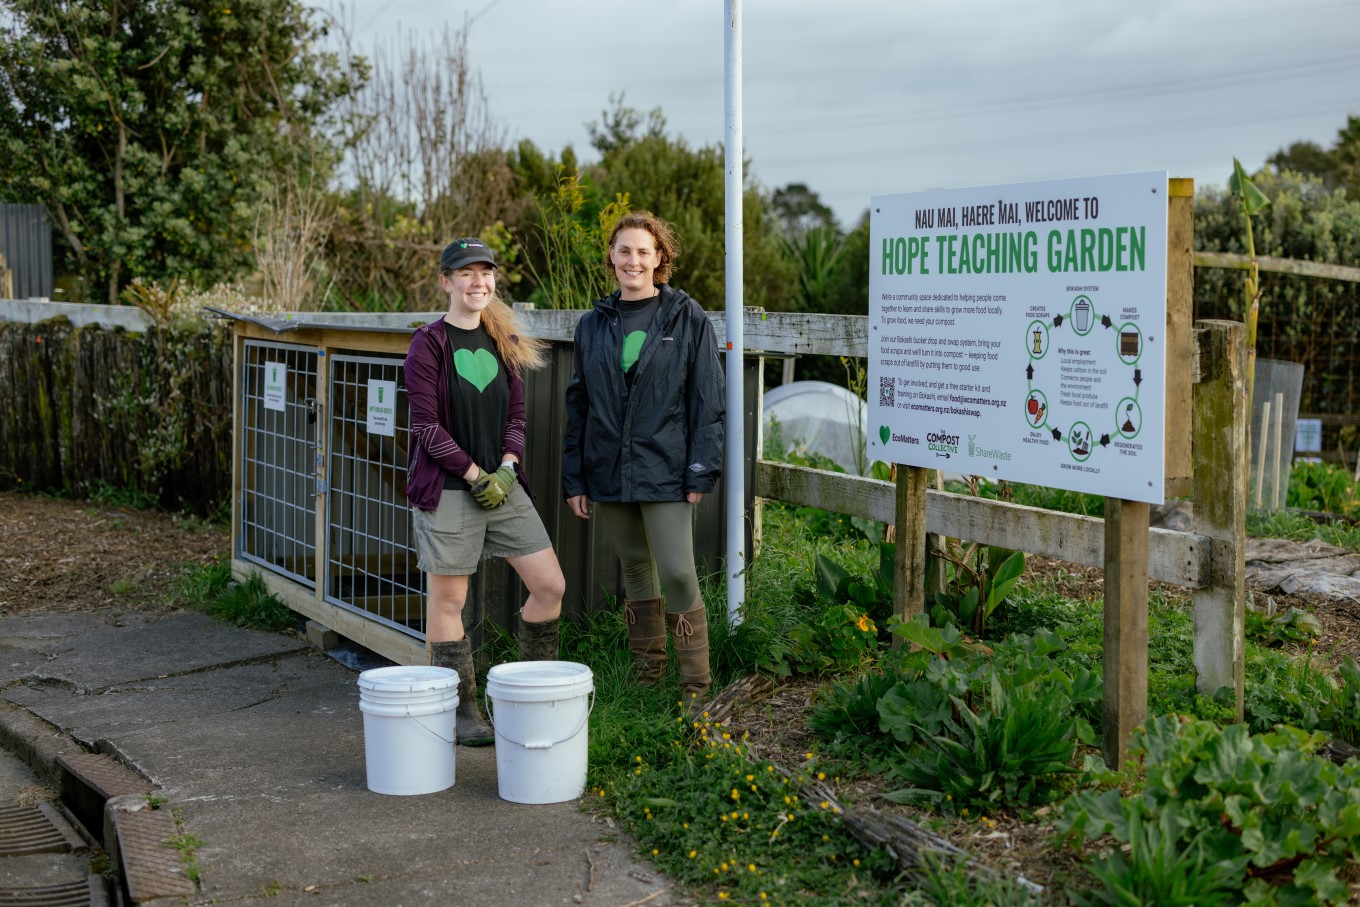 As an alternative to food scraps collection, Amanda Hookham-Kraft (right) and Emily Smith from Hope Teaching Garden in New Lynn run a bokashi swap and drop service where local schools, businesses and residents can donate their fermented food scraps to the community garden.